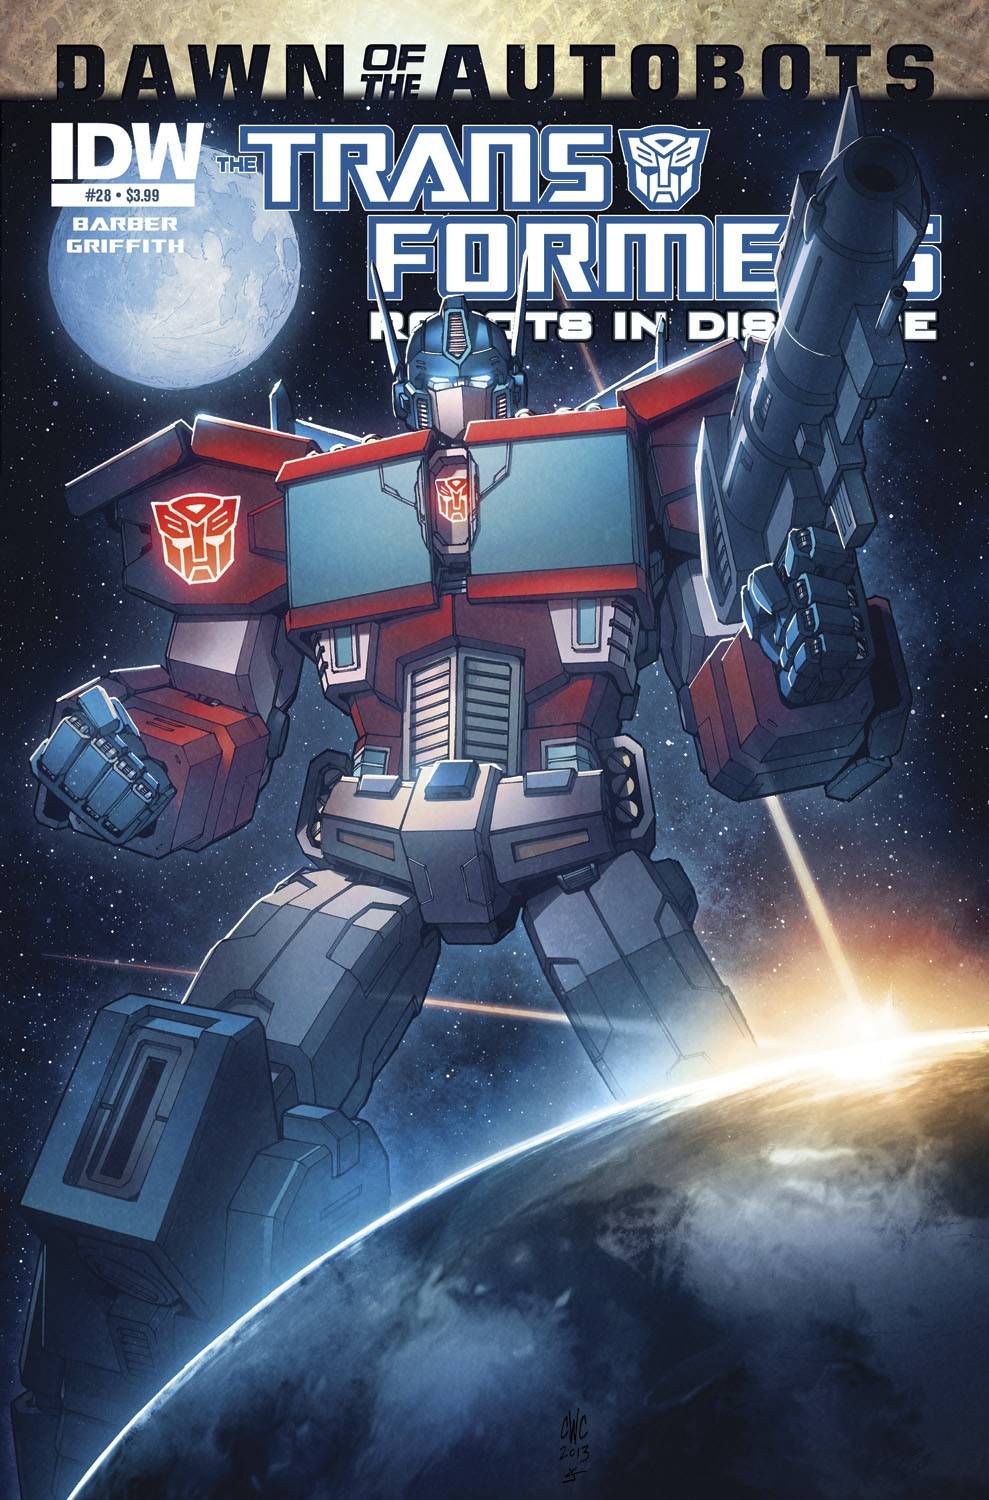 Transformers Robots In Disguise #28 (Dawn of the Autobots) Comic